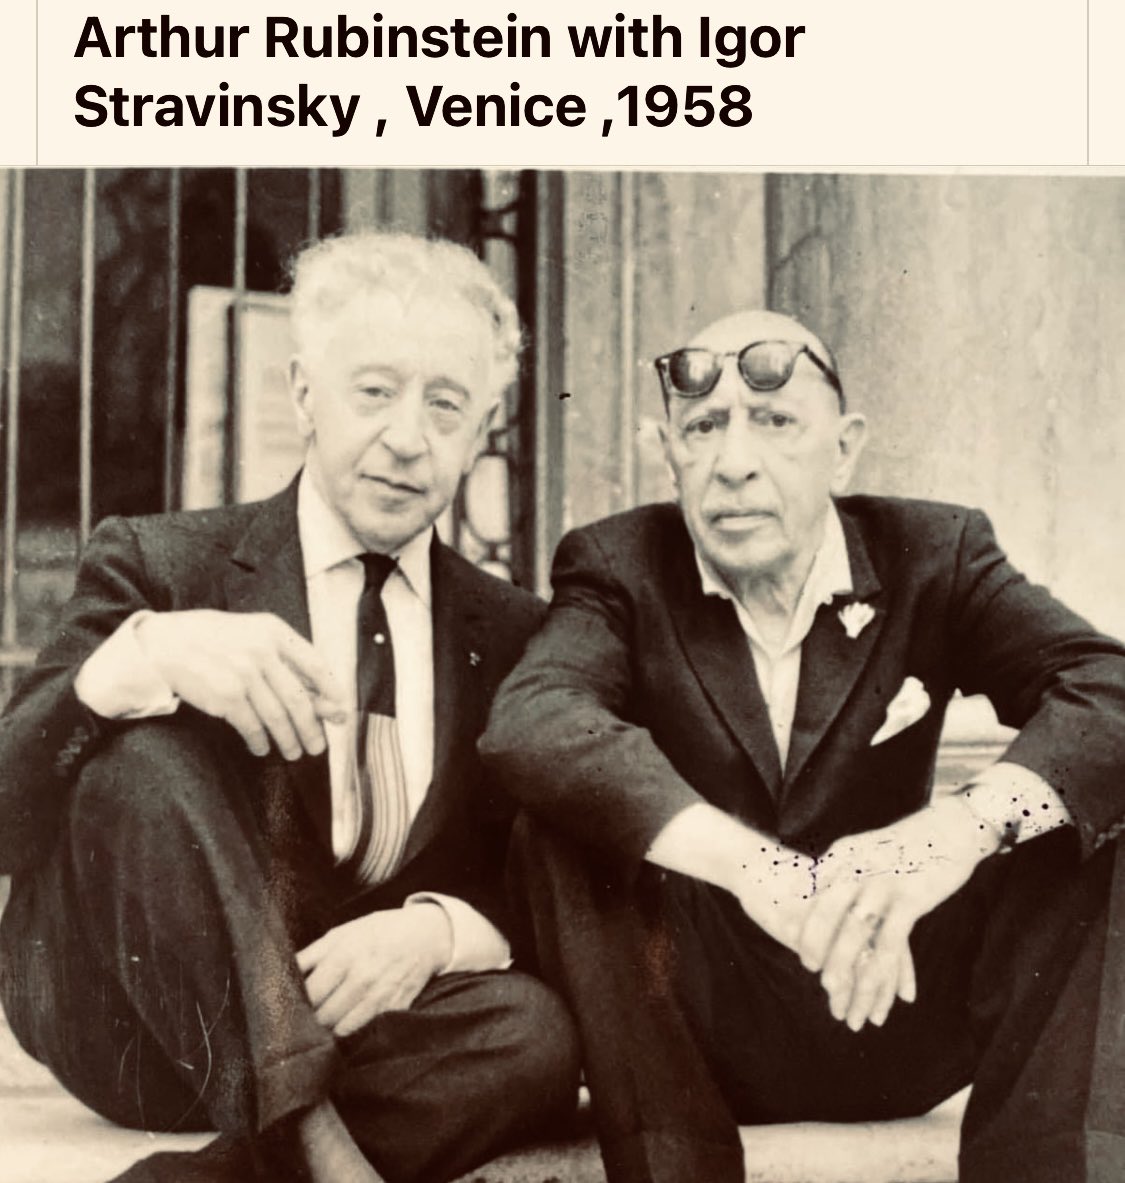 Looking enigmatic two dapper gentlemen and amazing musicians. #piano #pianists #composers #music